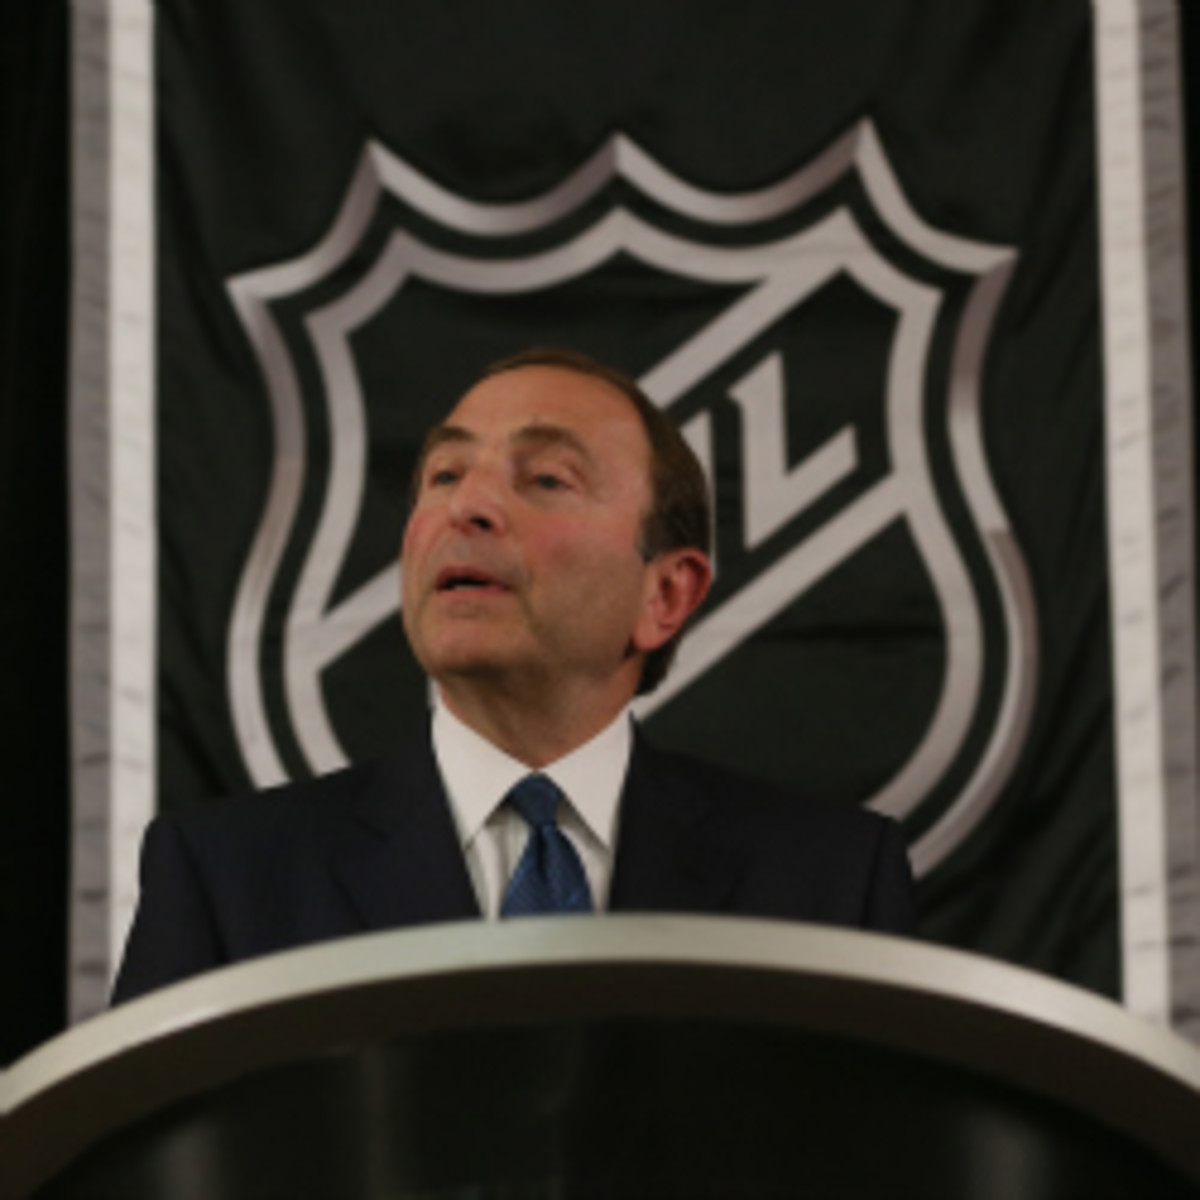 NHL Commissioner Gary Bettman spoke about the league's partnership with a gay advocacy group and reaffirmed the NHL's position supporting gay athletes. (Bruce Bennett/Getty Images)